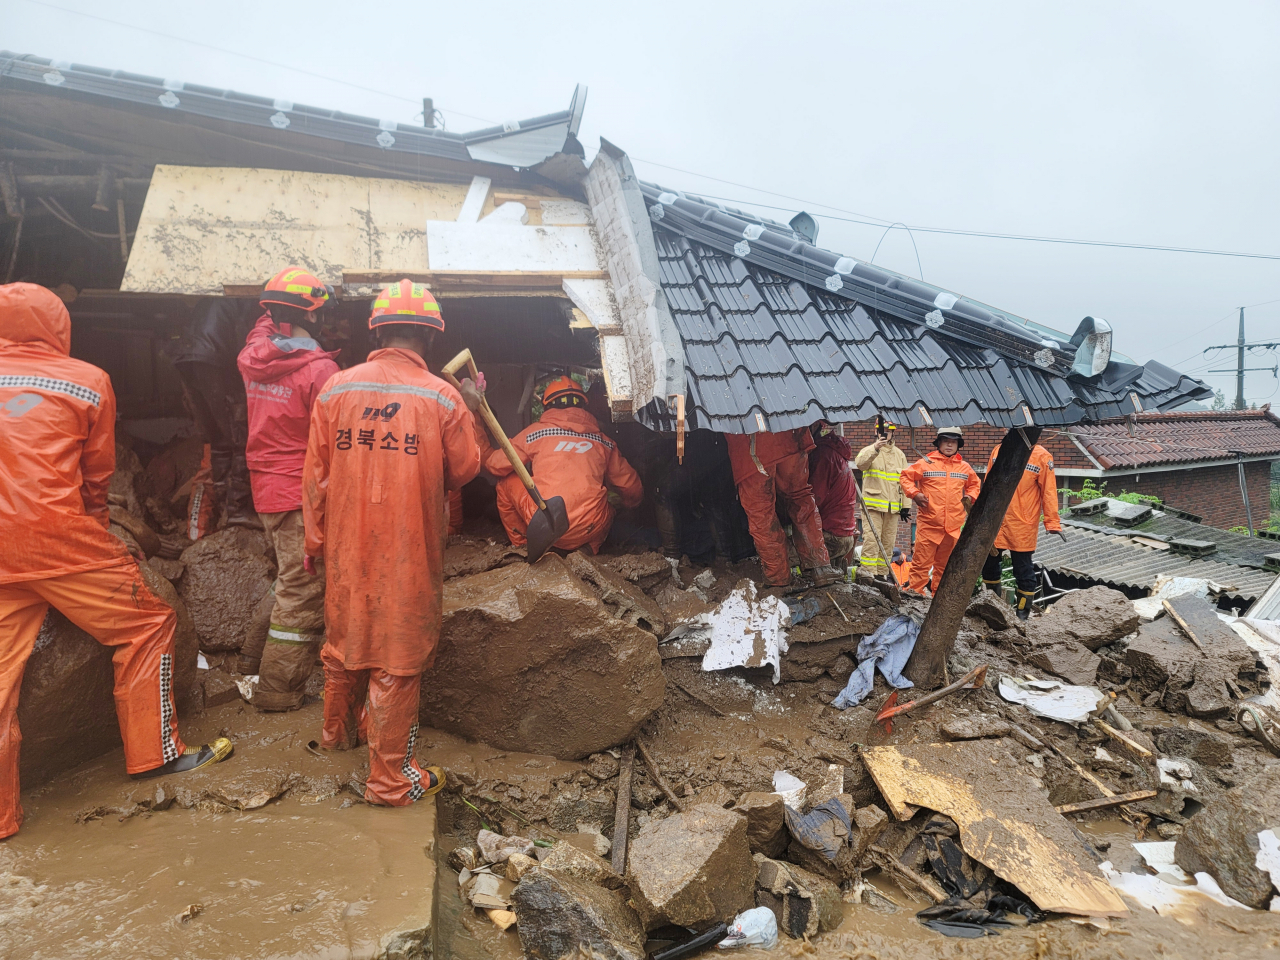 Firefighters carry out a rescue operation after a house was destroyed by landslides in Yeongju, North Gyeongsang Province, Saturday. (Yonhap)